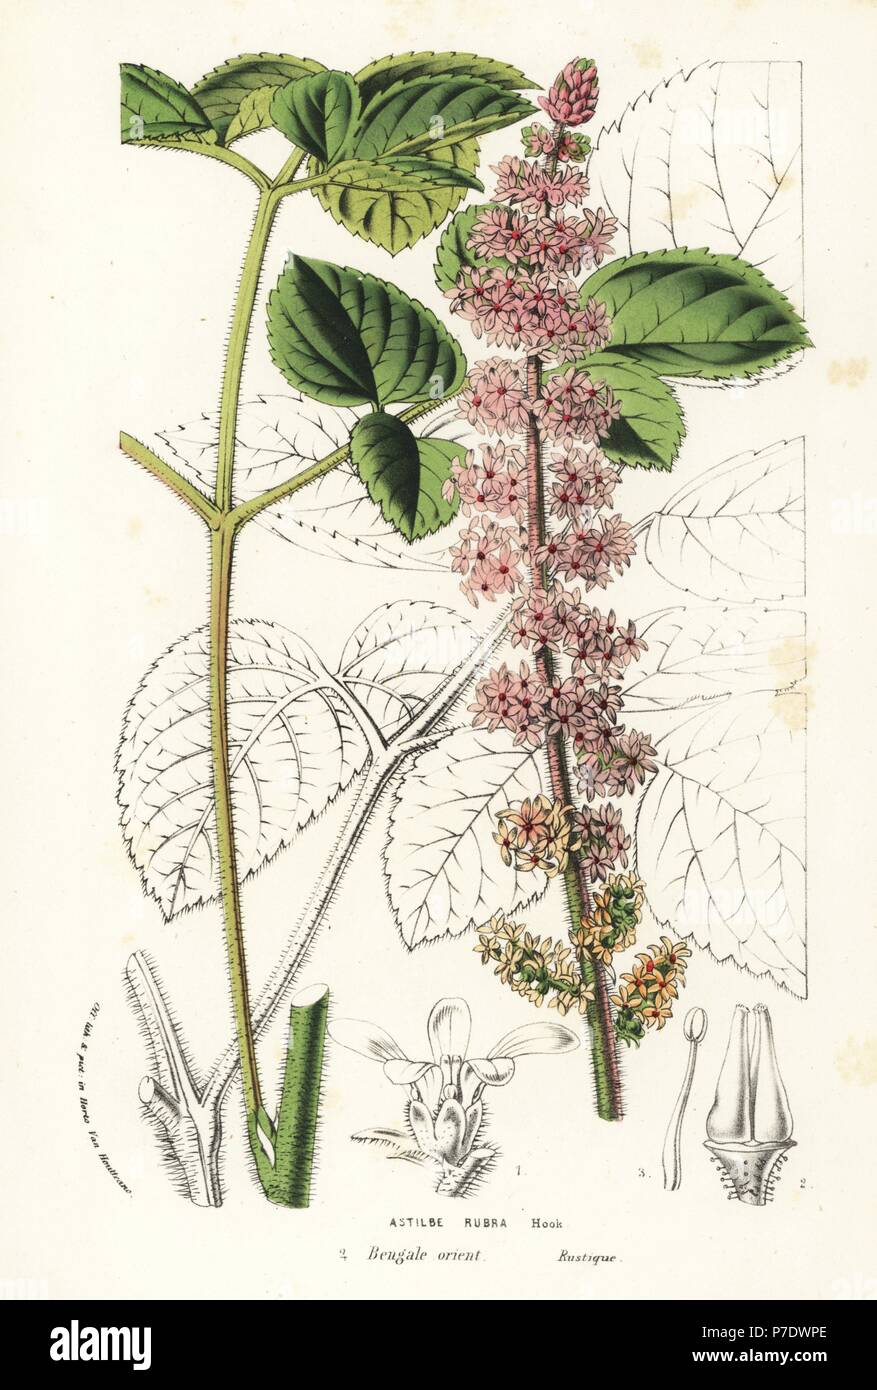 Chinese astilbe, Astilbe rubra. Handcoloured lithograph from Louis van Houtte and Charles Lemaire's Flowers of the Gardens and Hothouses of Europe, Flore des Serres et des Jardins de l'Europe, Ghent, Belgium, 1857. Stock Photo